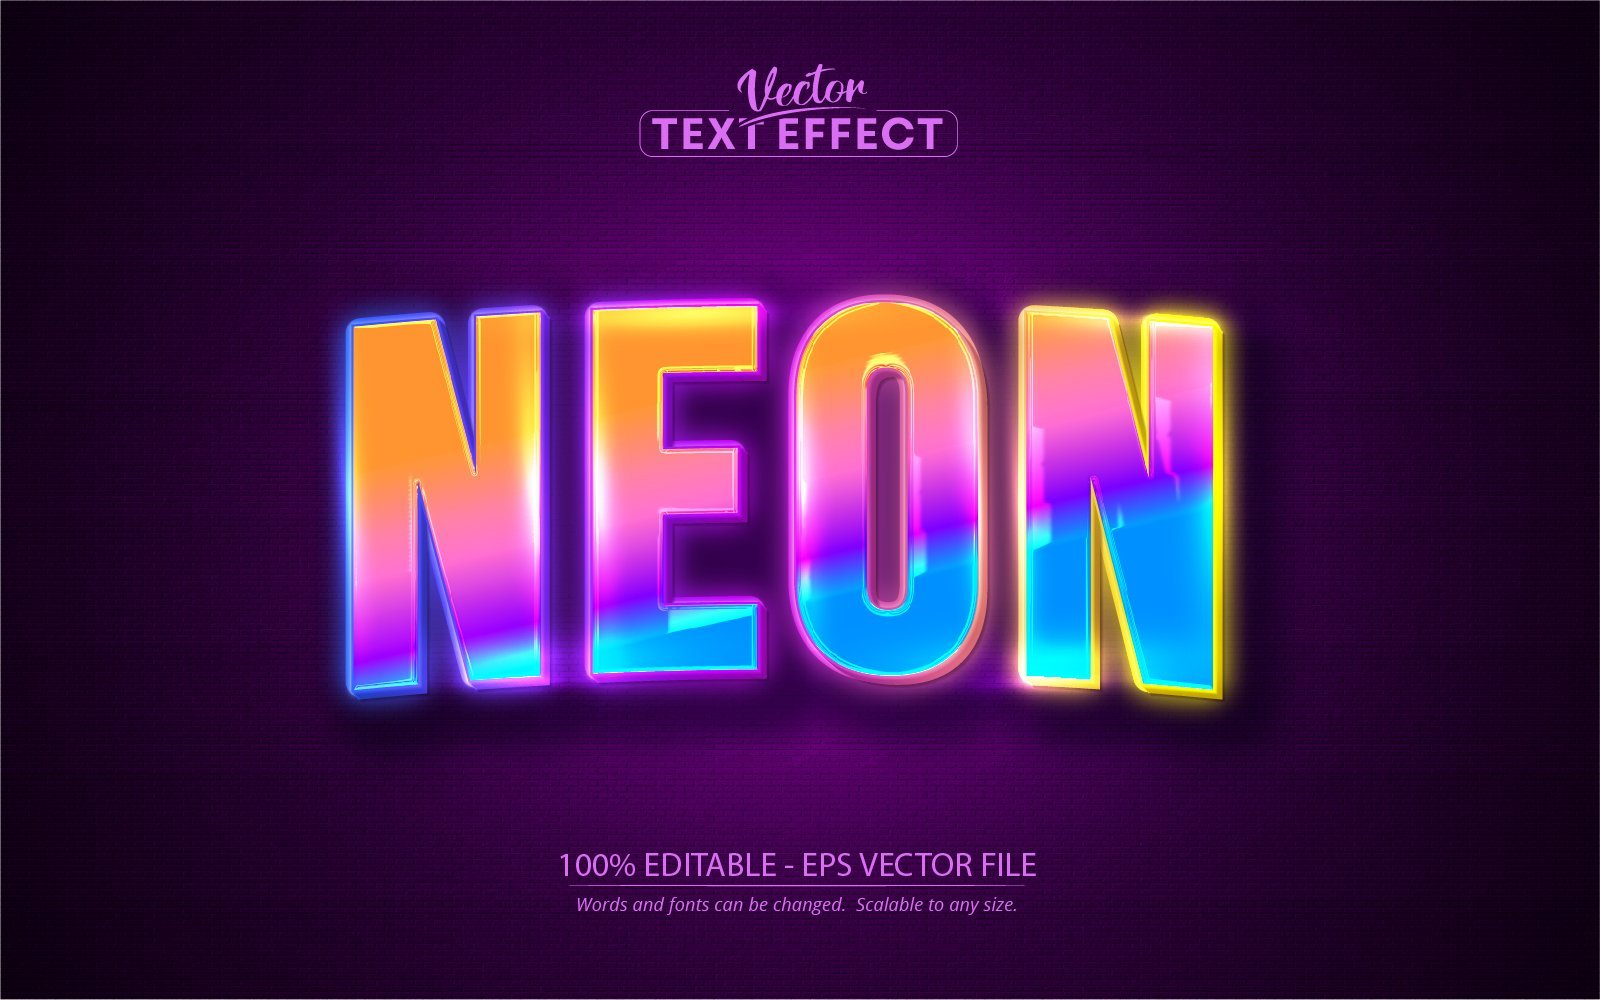 Neon - Editable Text Effect, Colorful Shiny Neon Light Text Style, Graphics Illustration